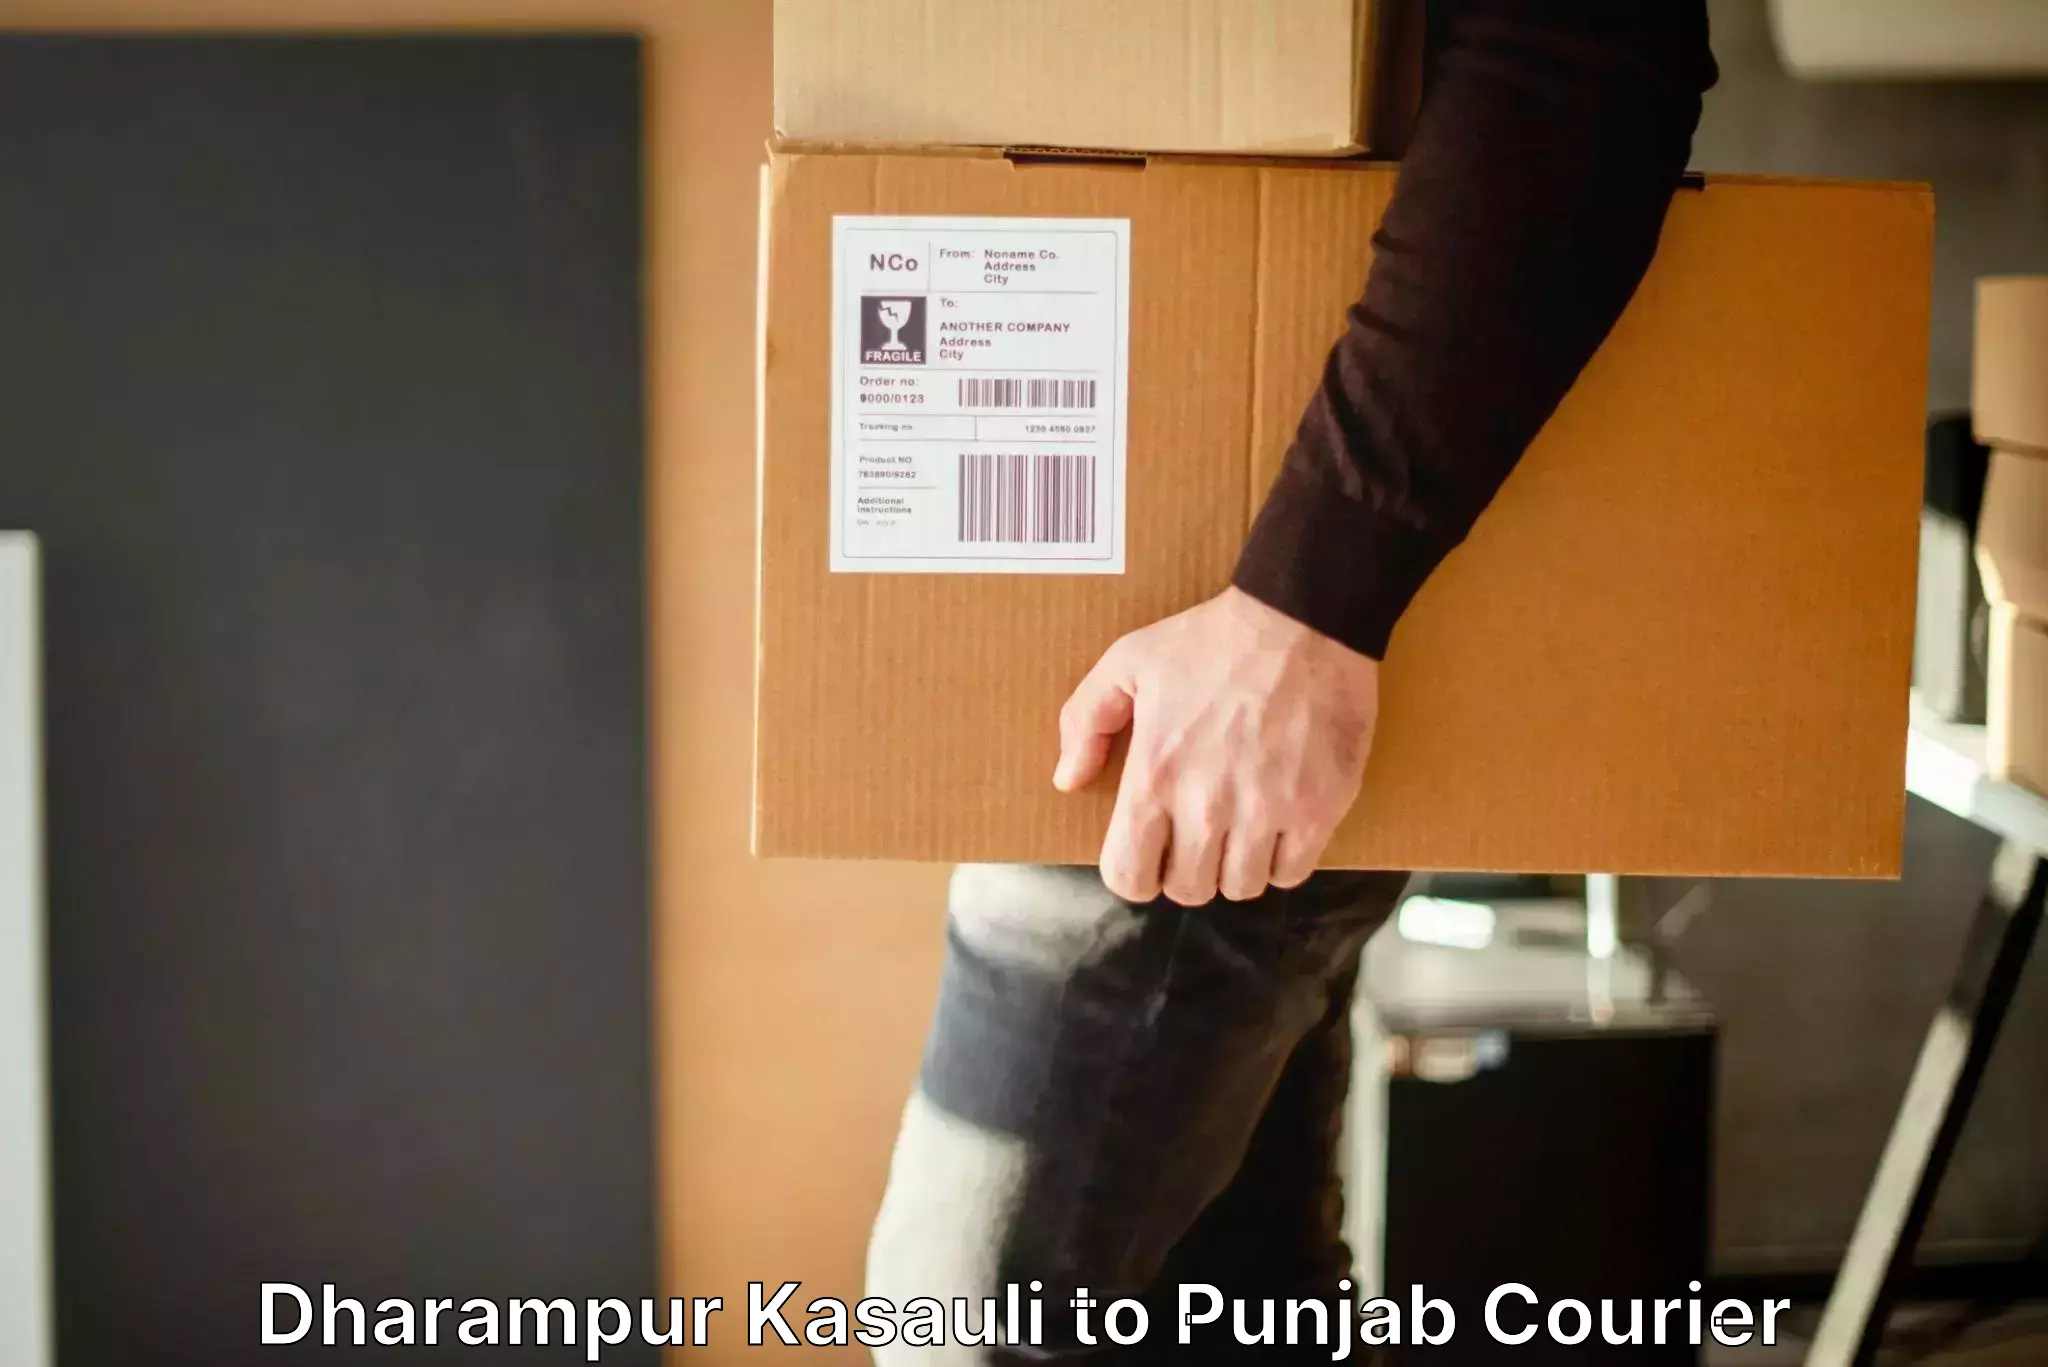 Luggage shipping specialists Dharampur Kasauli to Ludhiana